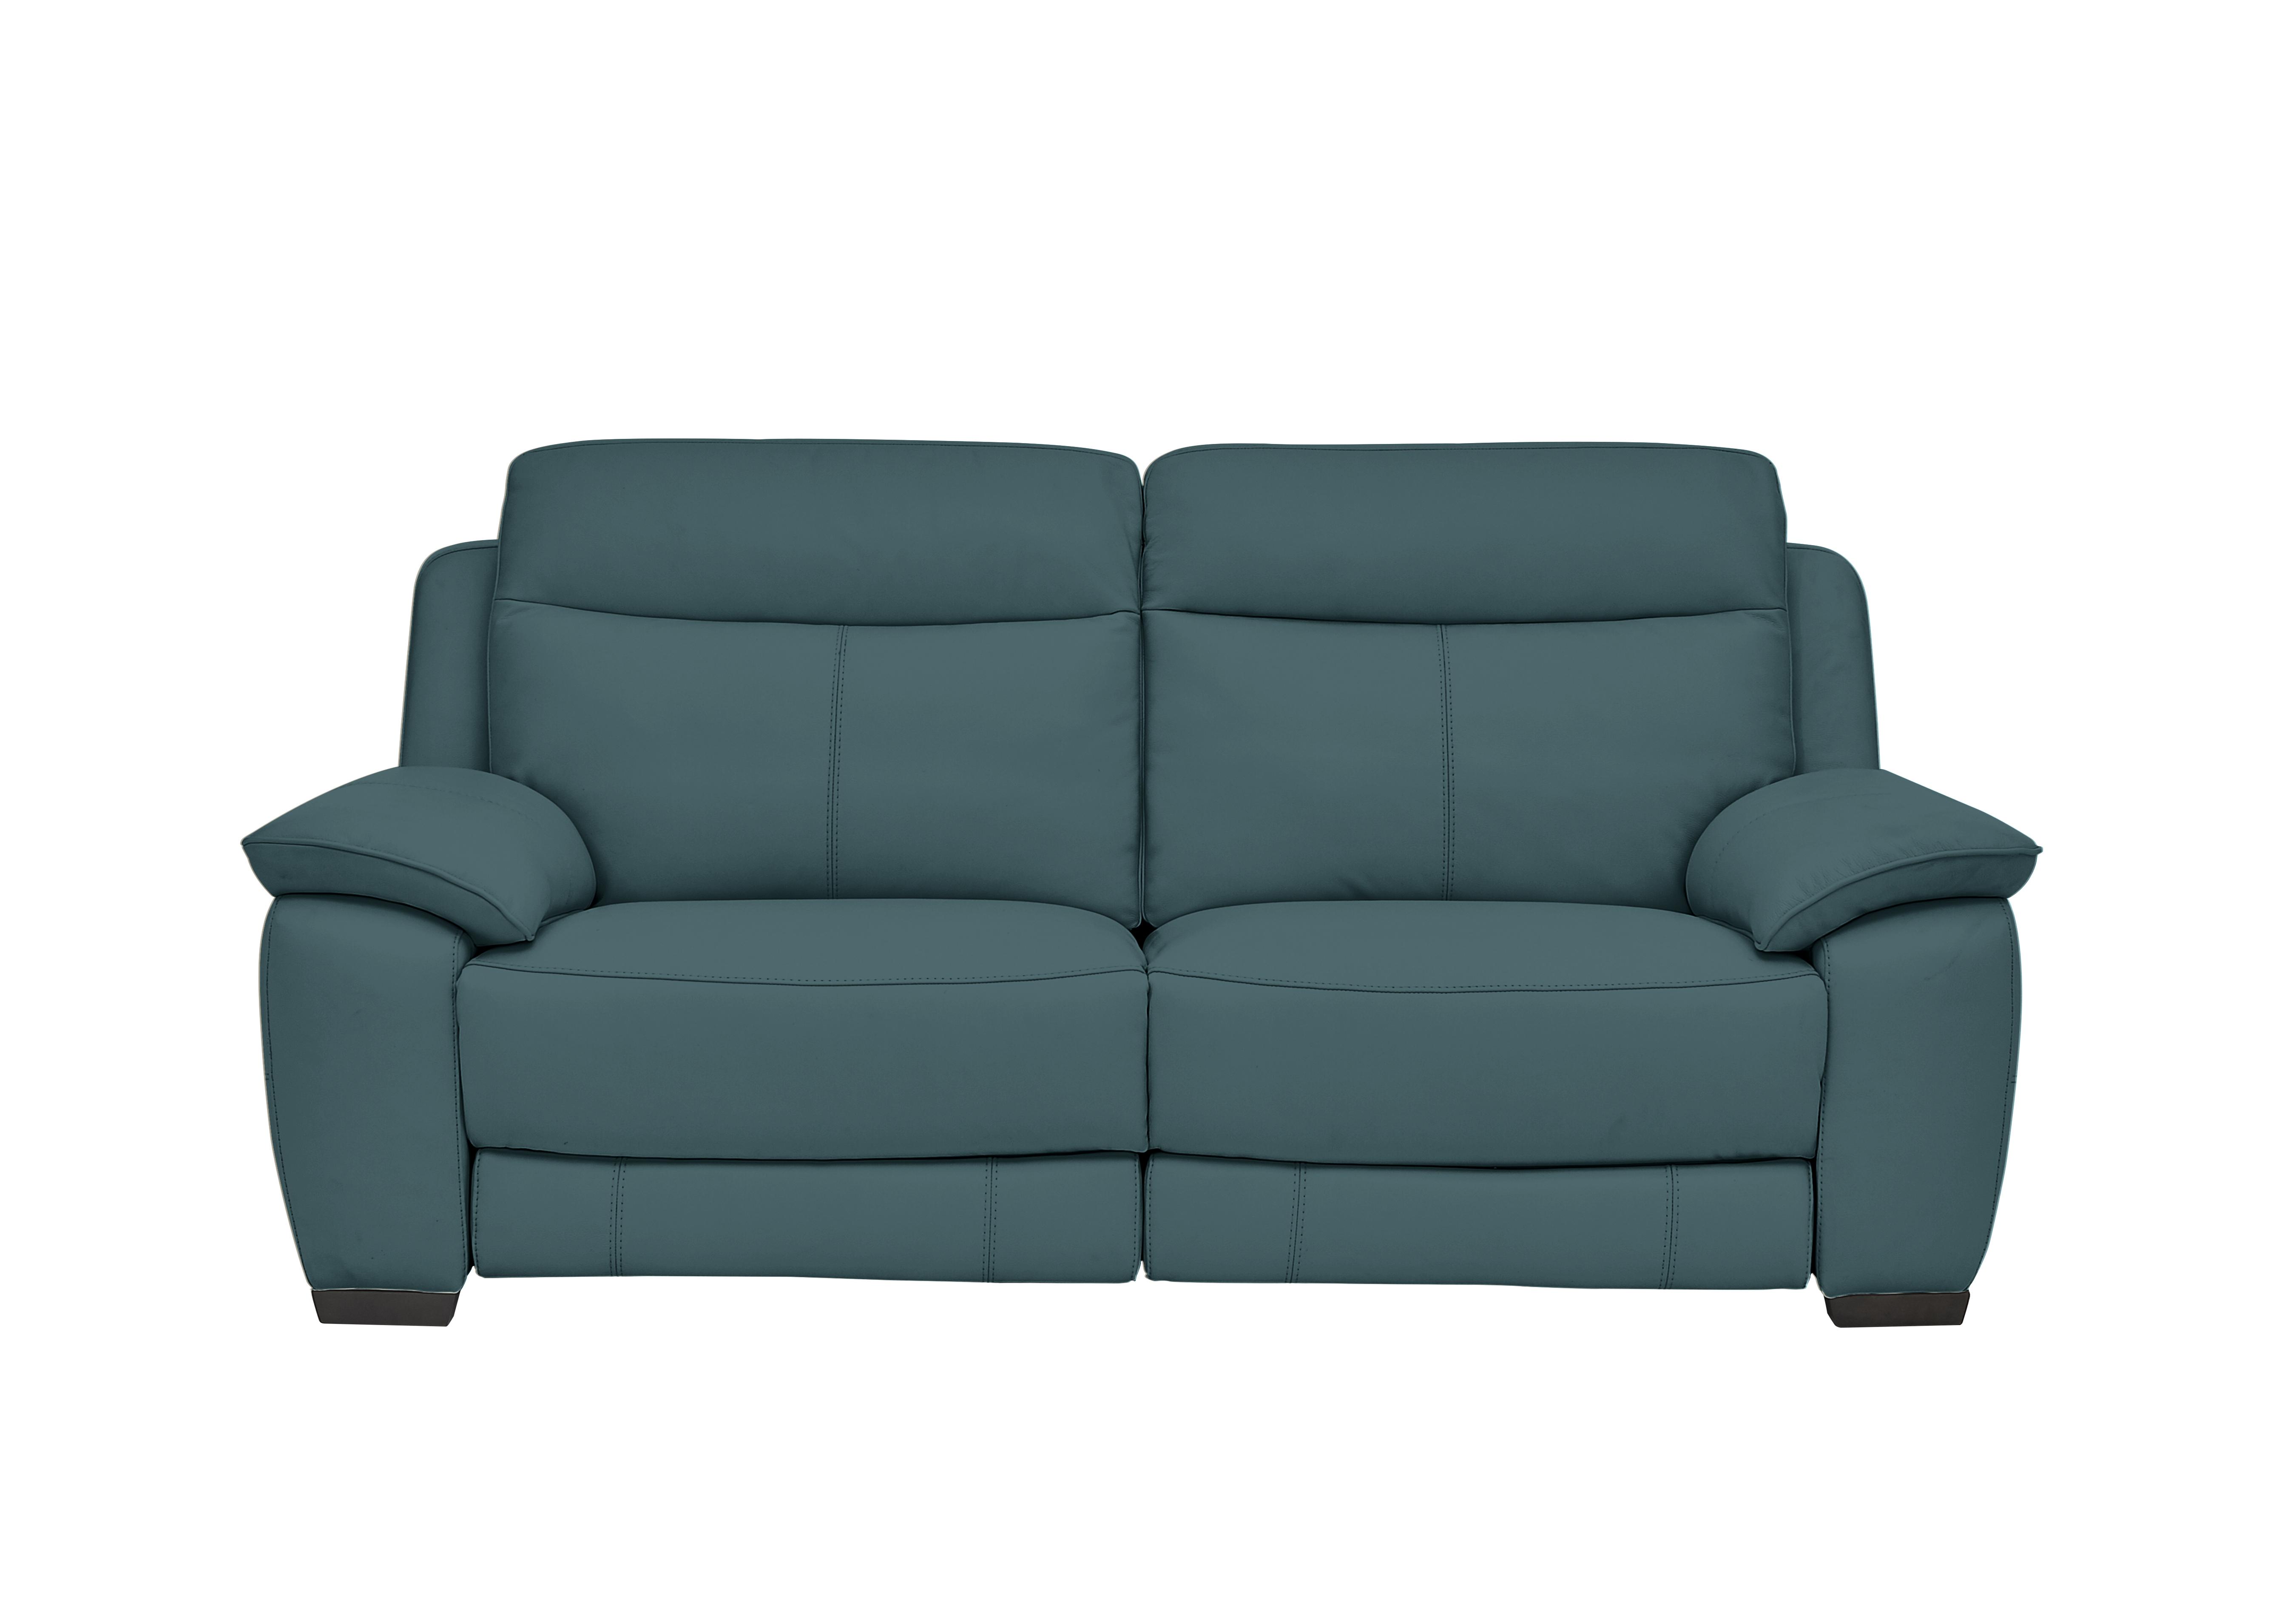 Starlight Express 3 Seater Leather Recliner Sofa with Power Headrests in Bv-301e Lake Green on Furniture Village